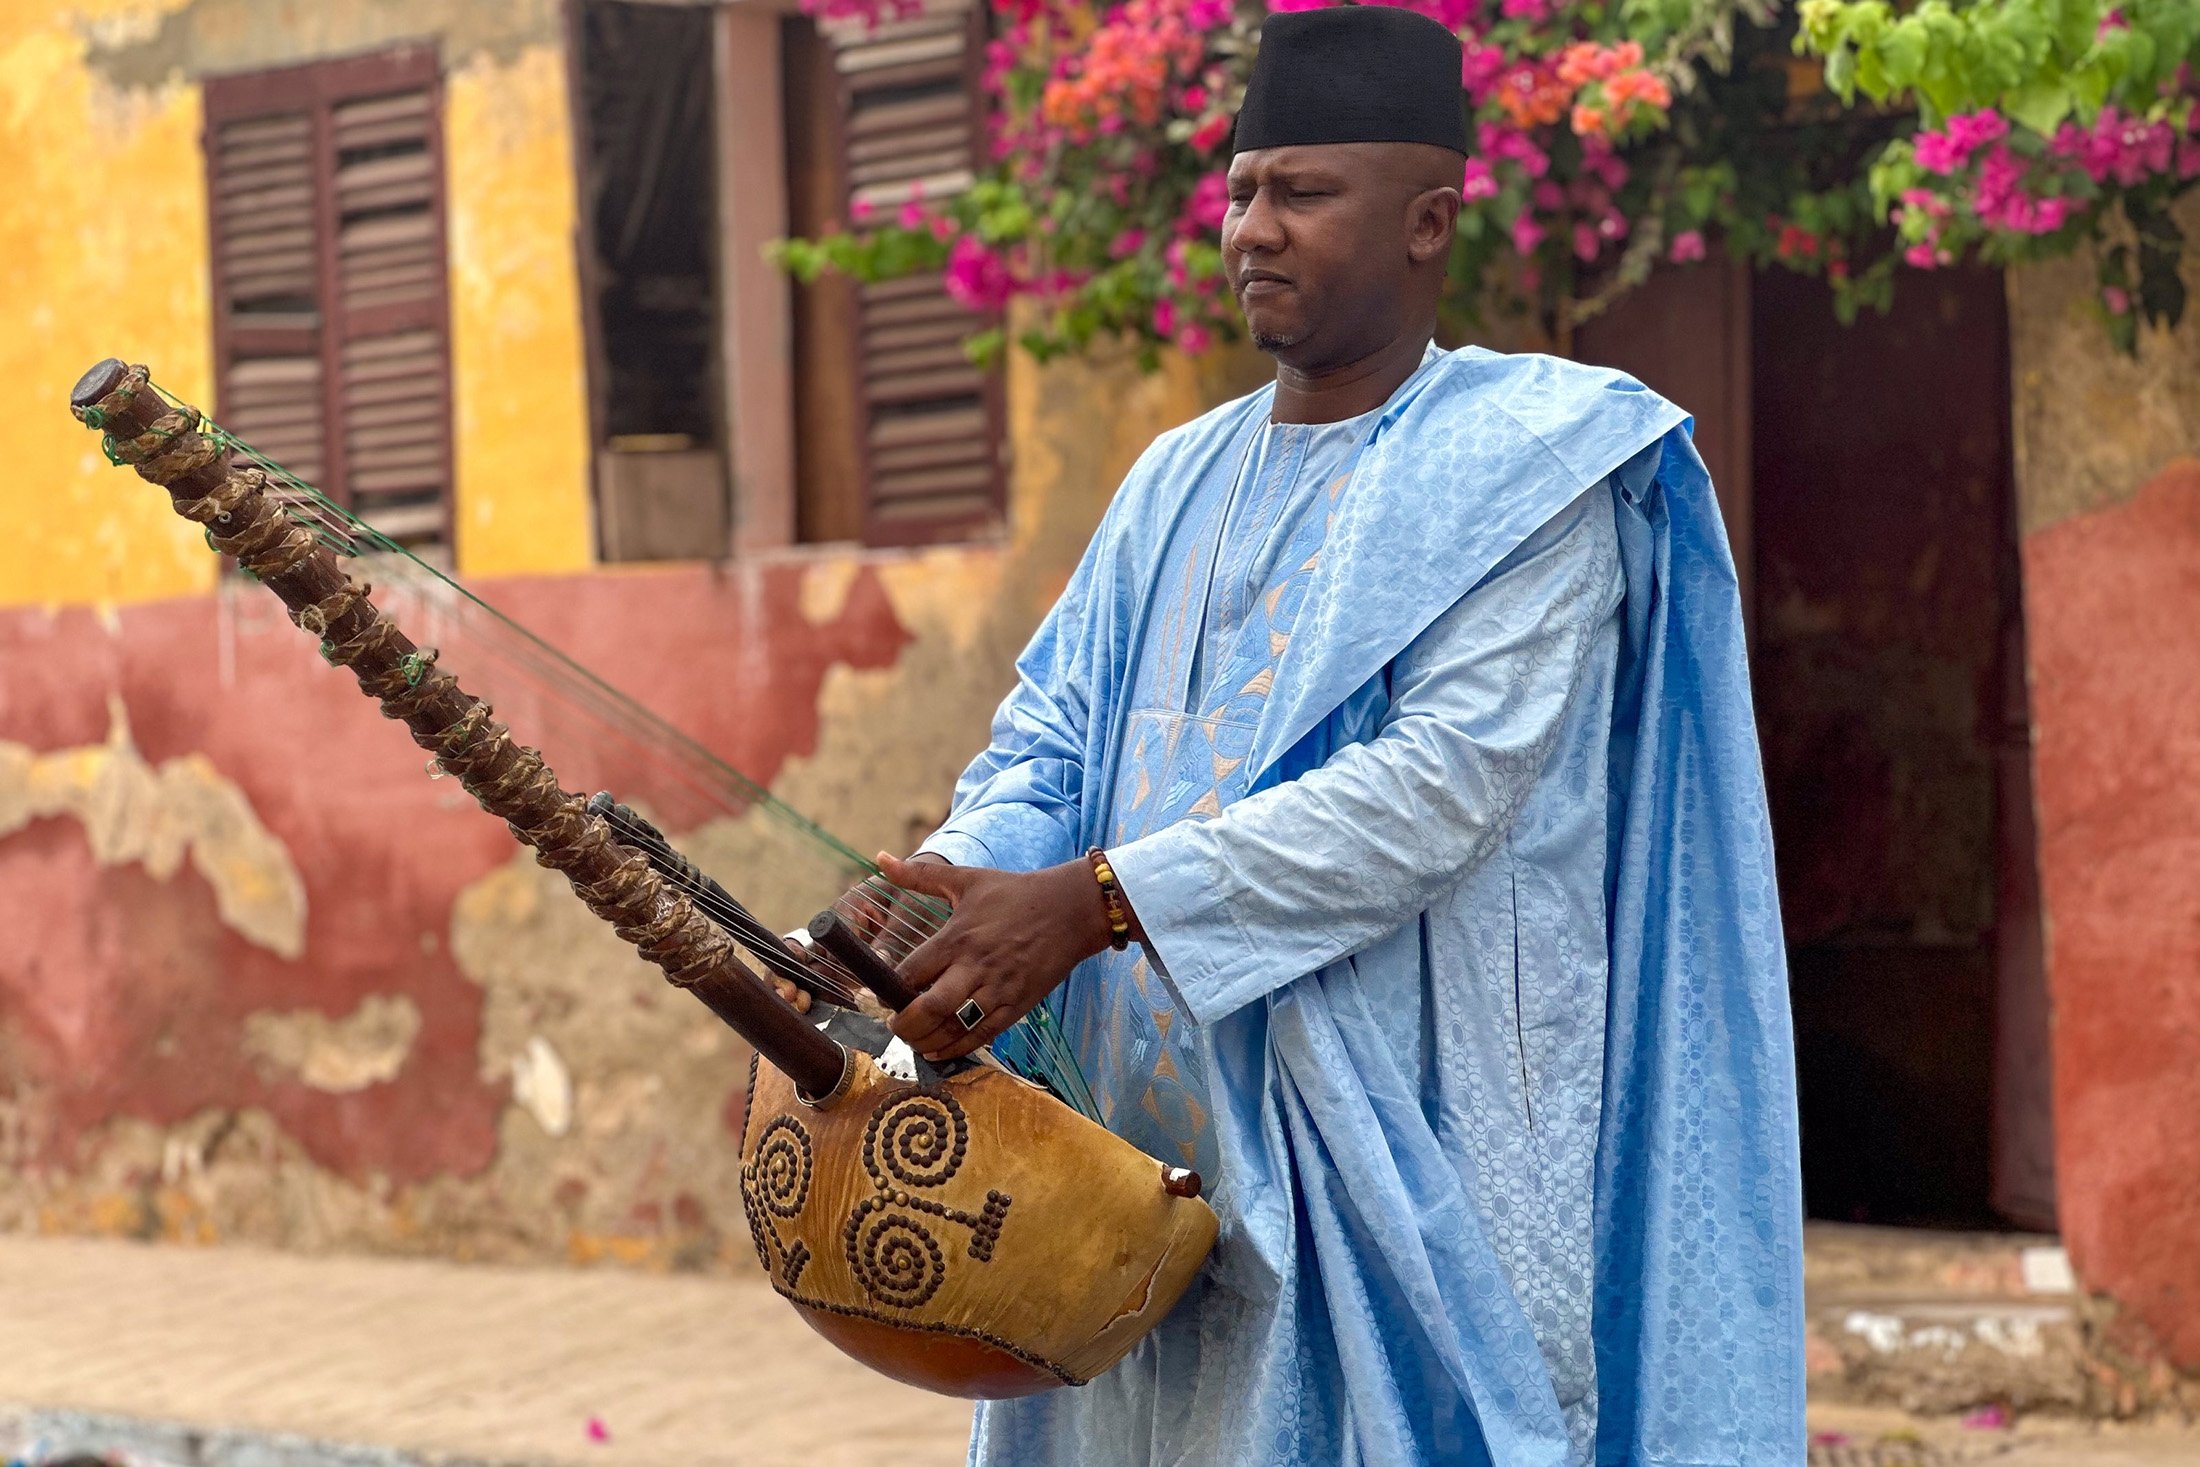 Kora Sounds from the Griot Compounds in The Gambia